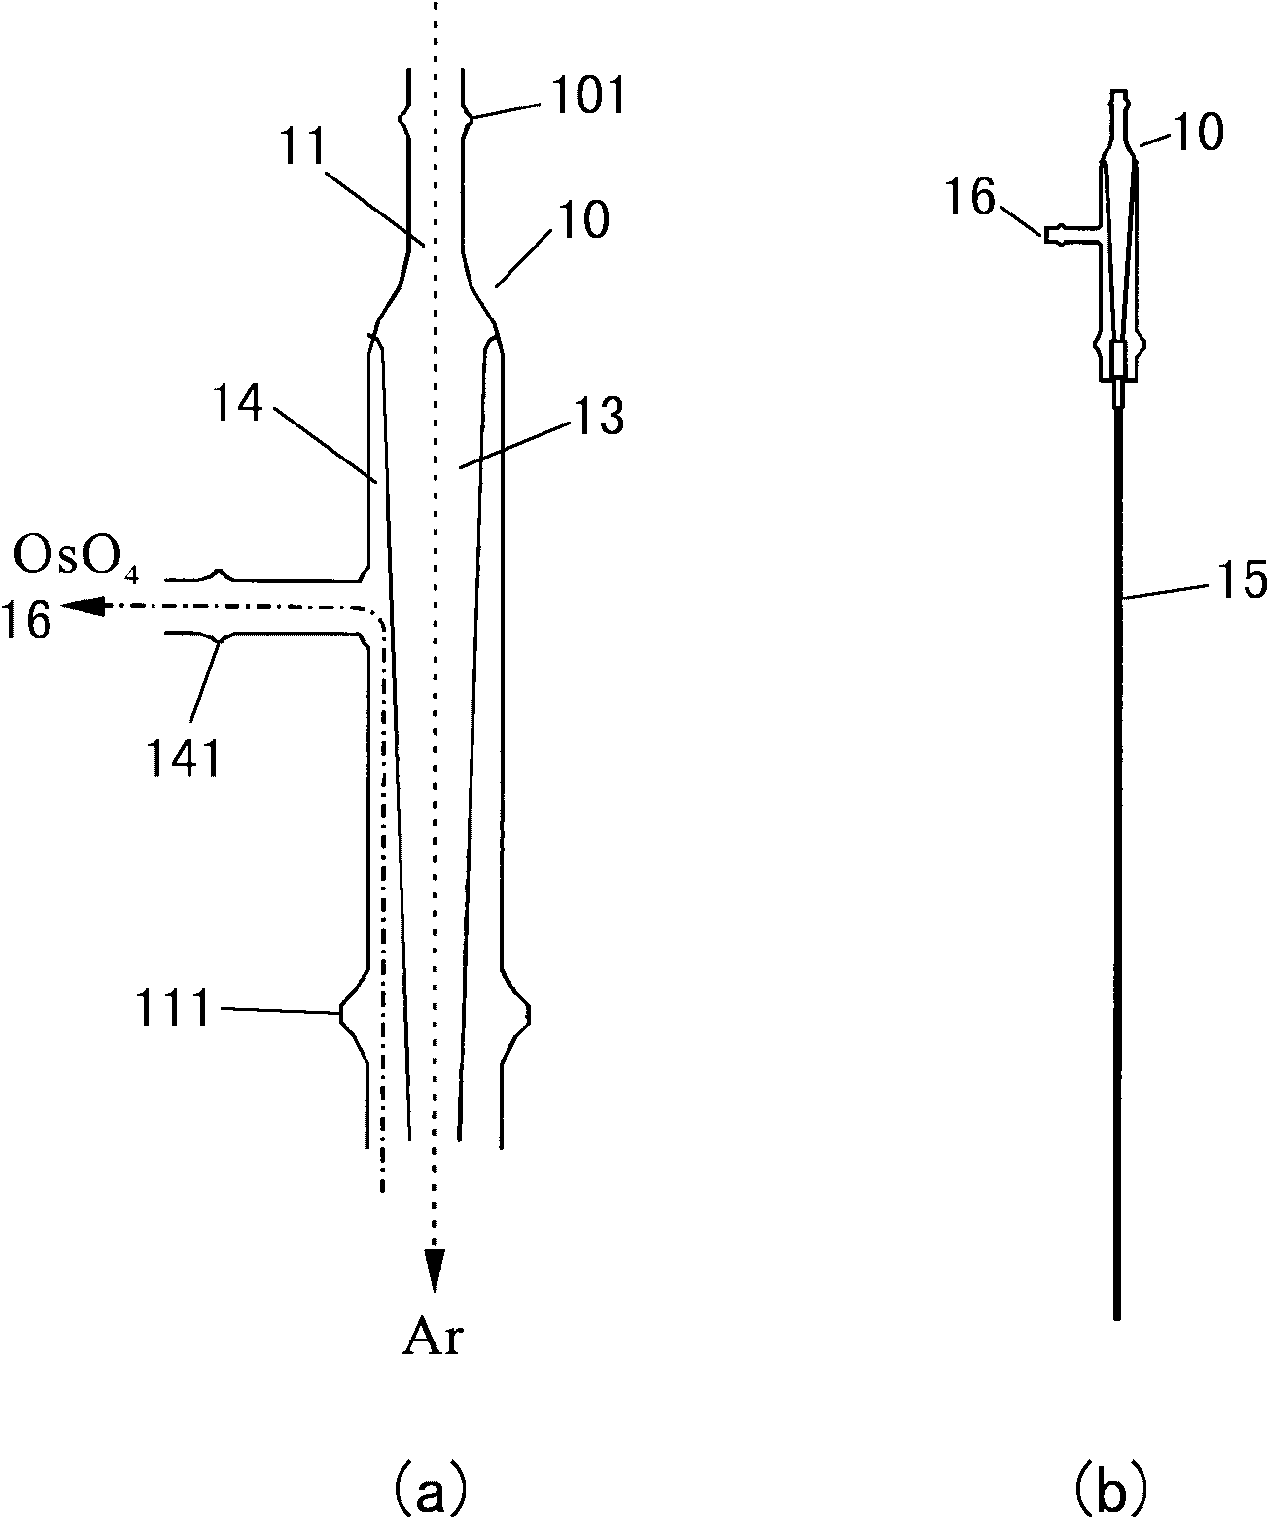 Method for in-situ distillation and on-line measurement of Os in Carius tube